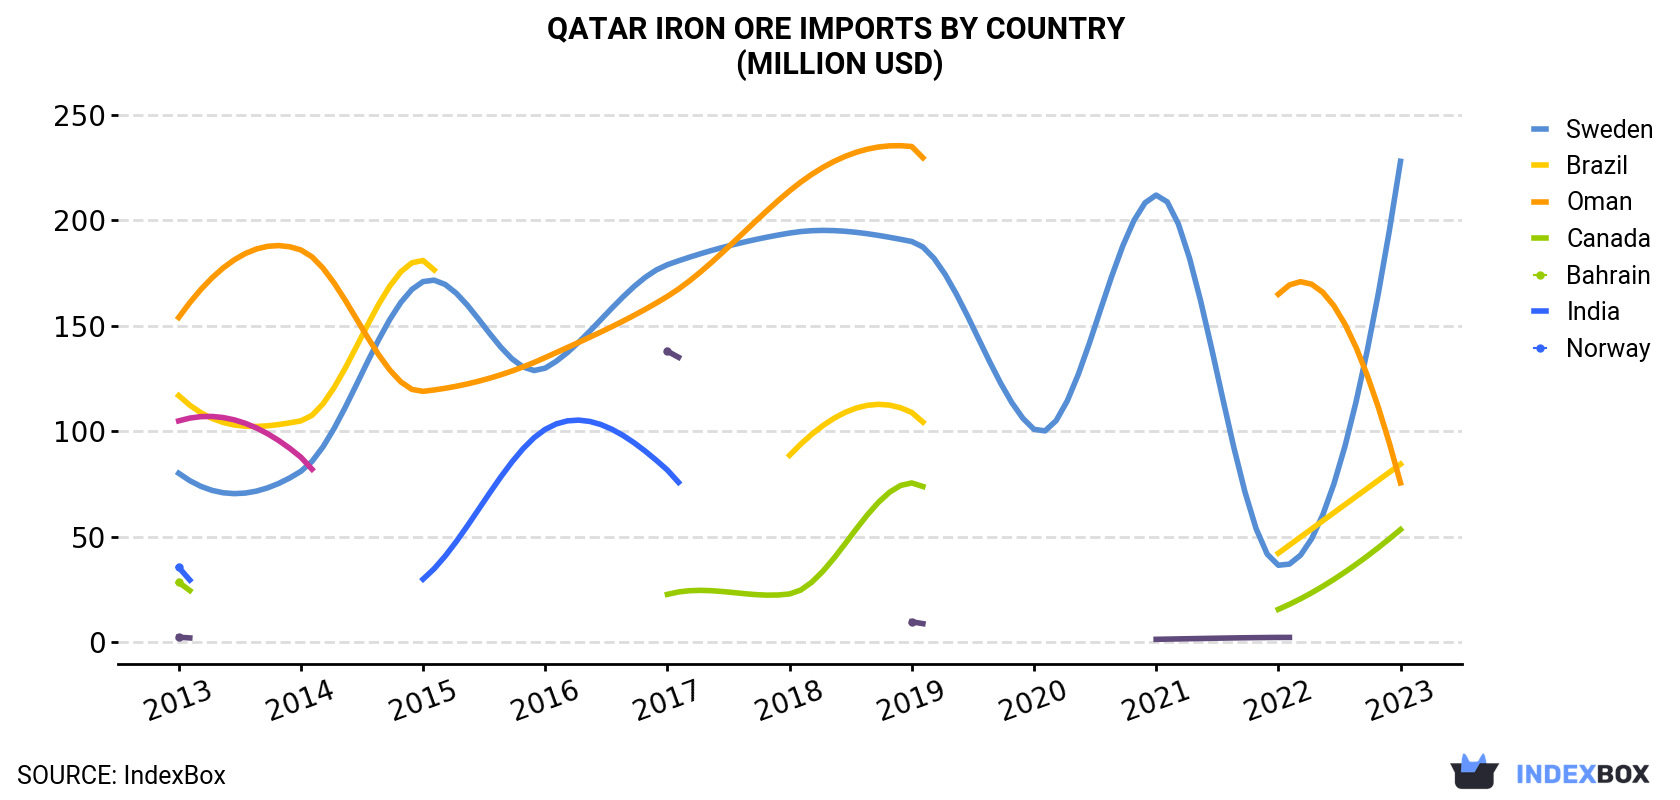 Qatar Iron Ore Imports By Country (Million USD)